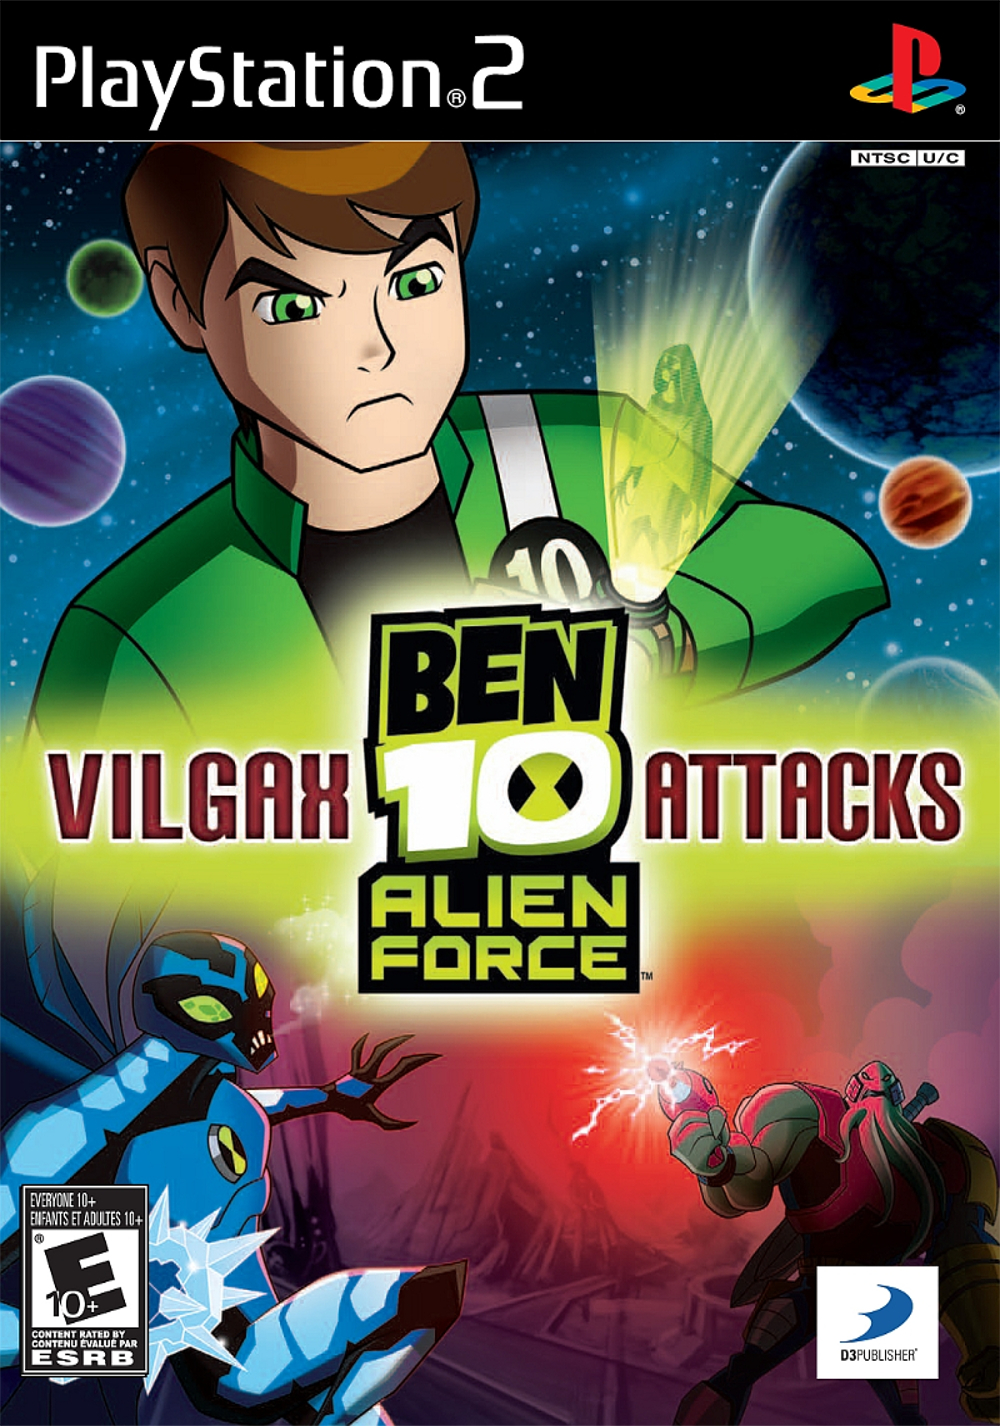 ben 10 alien force vilgax attacks cheats for ppsspp download